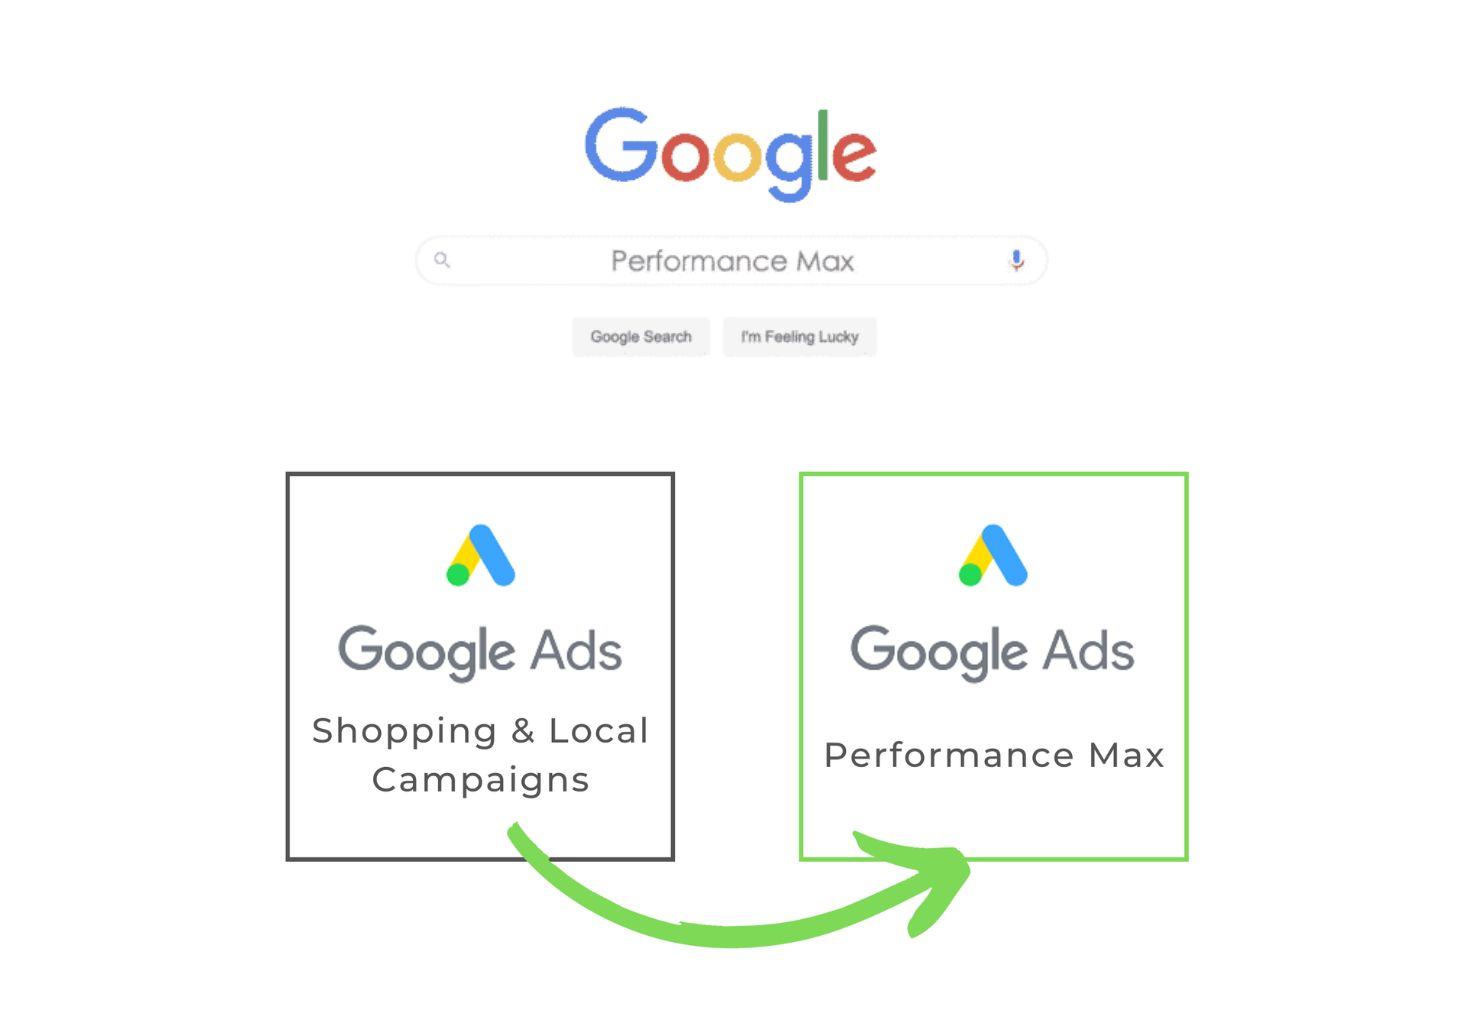 How to properly set up Performance Max campaigns